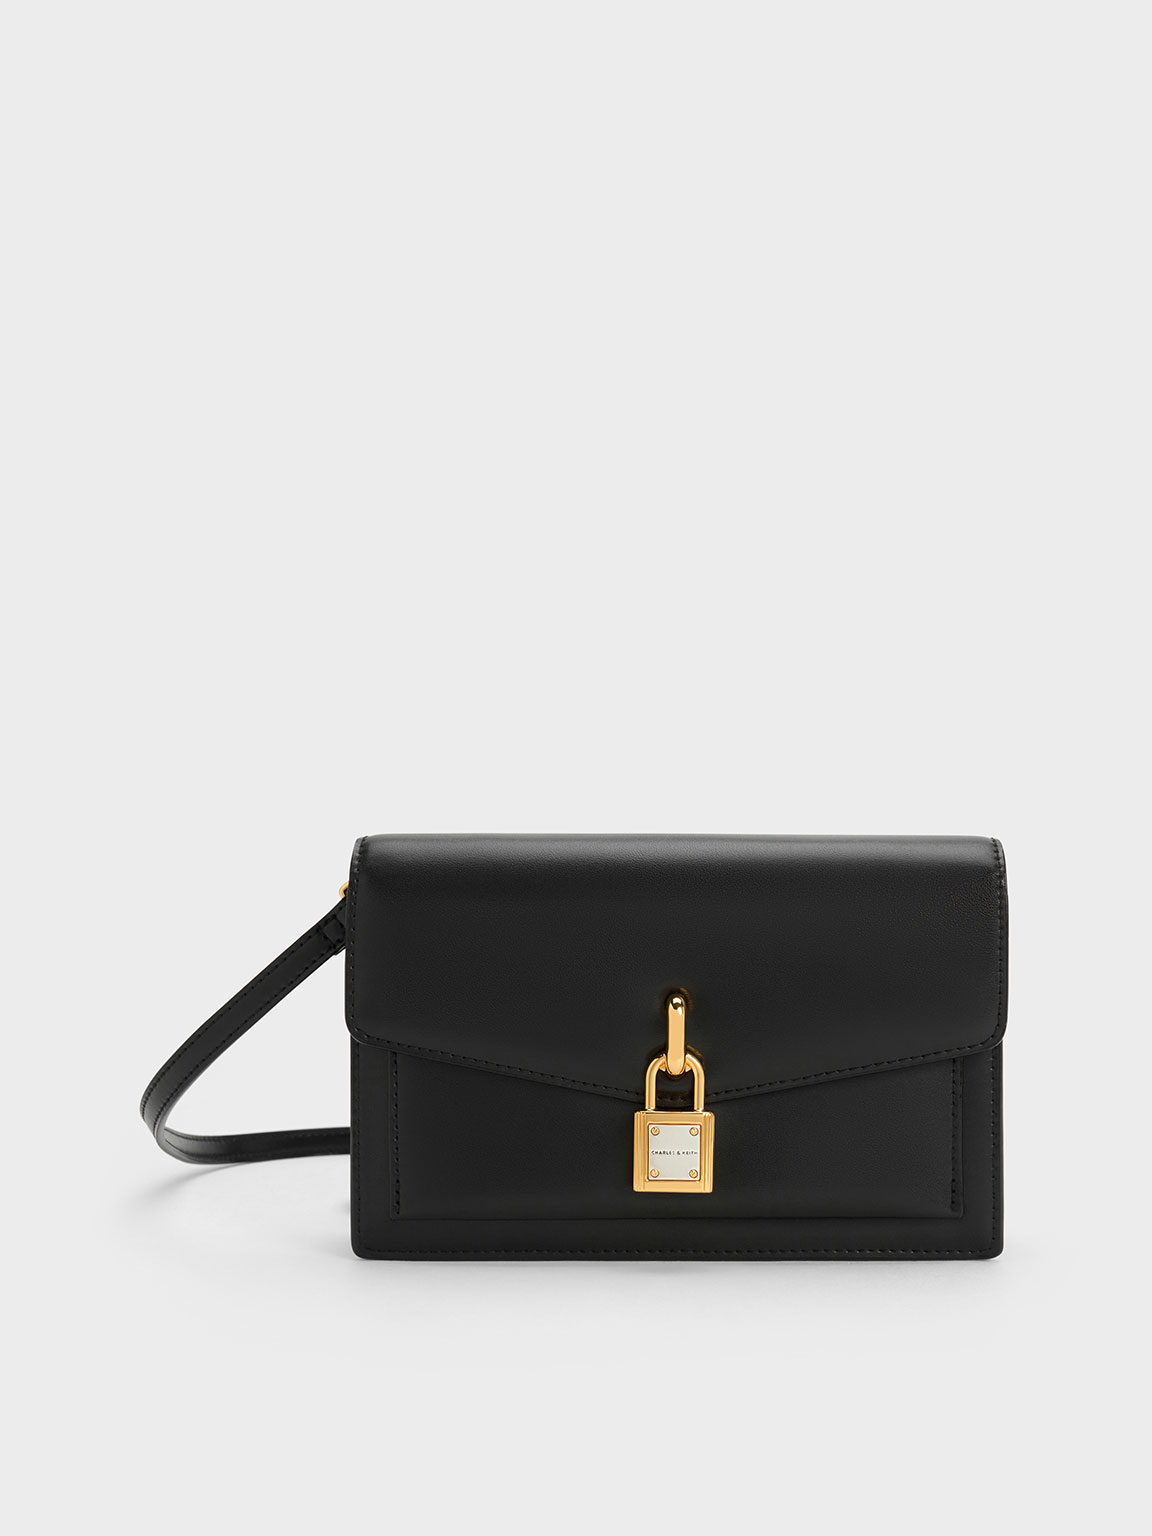 Added a YSL envelope bag to my collection! : r/handbags